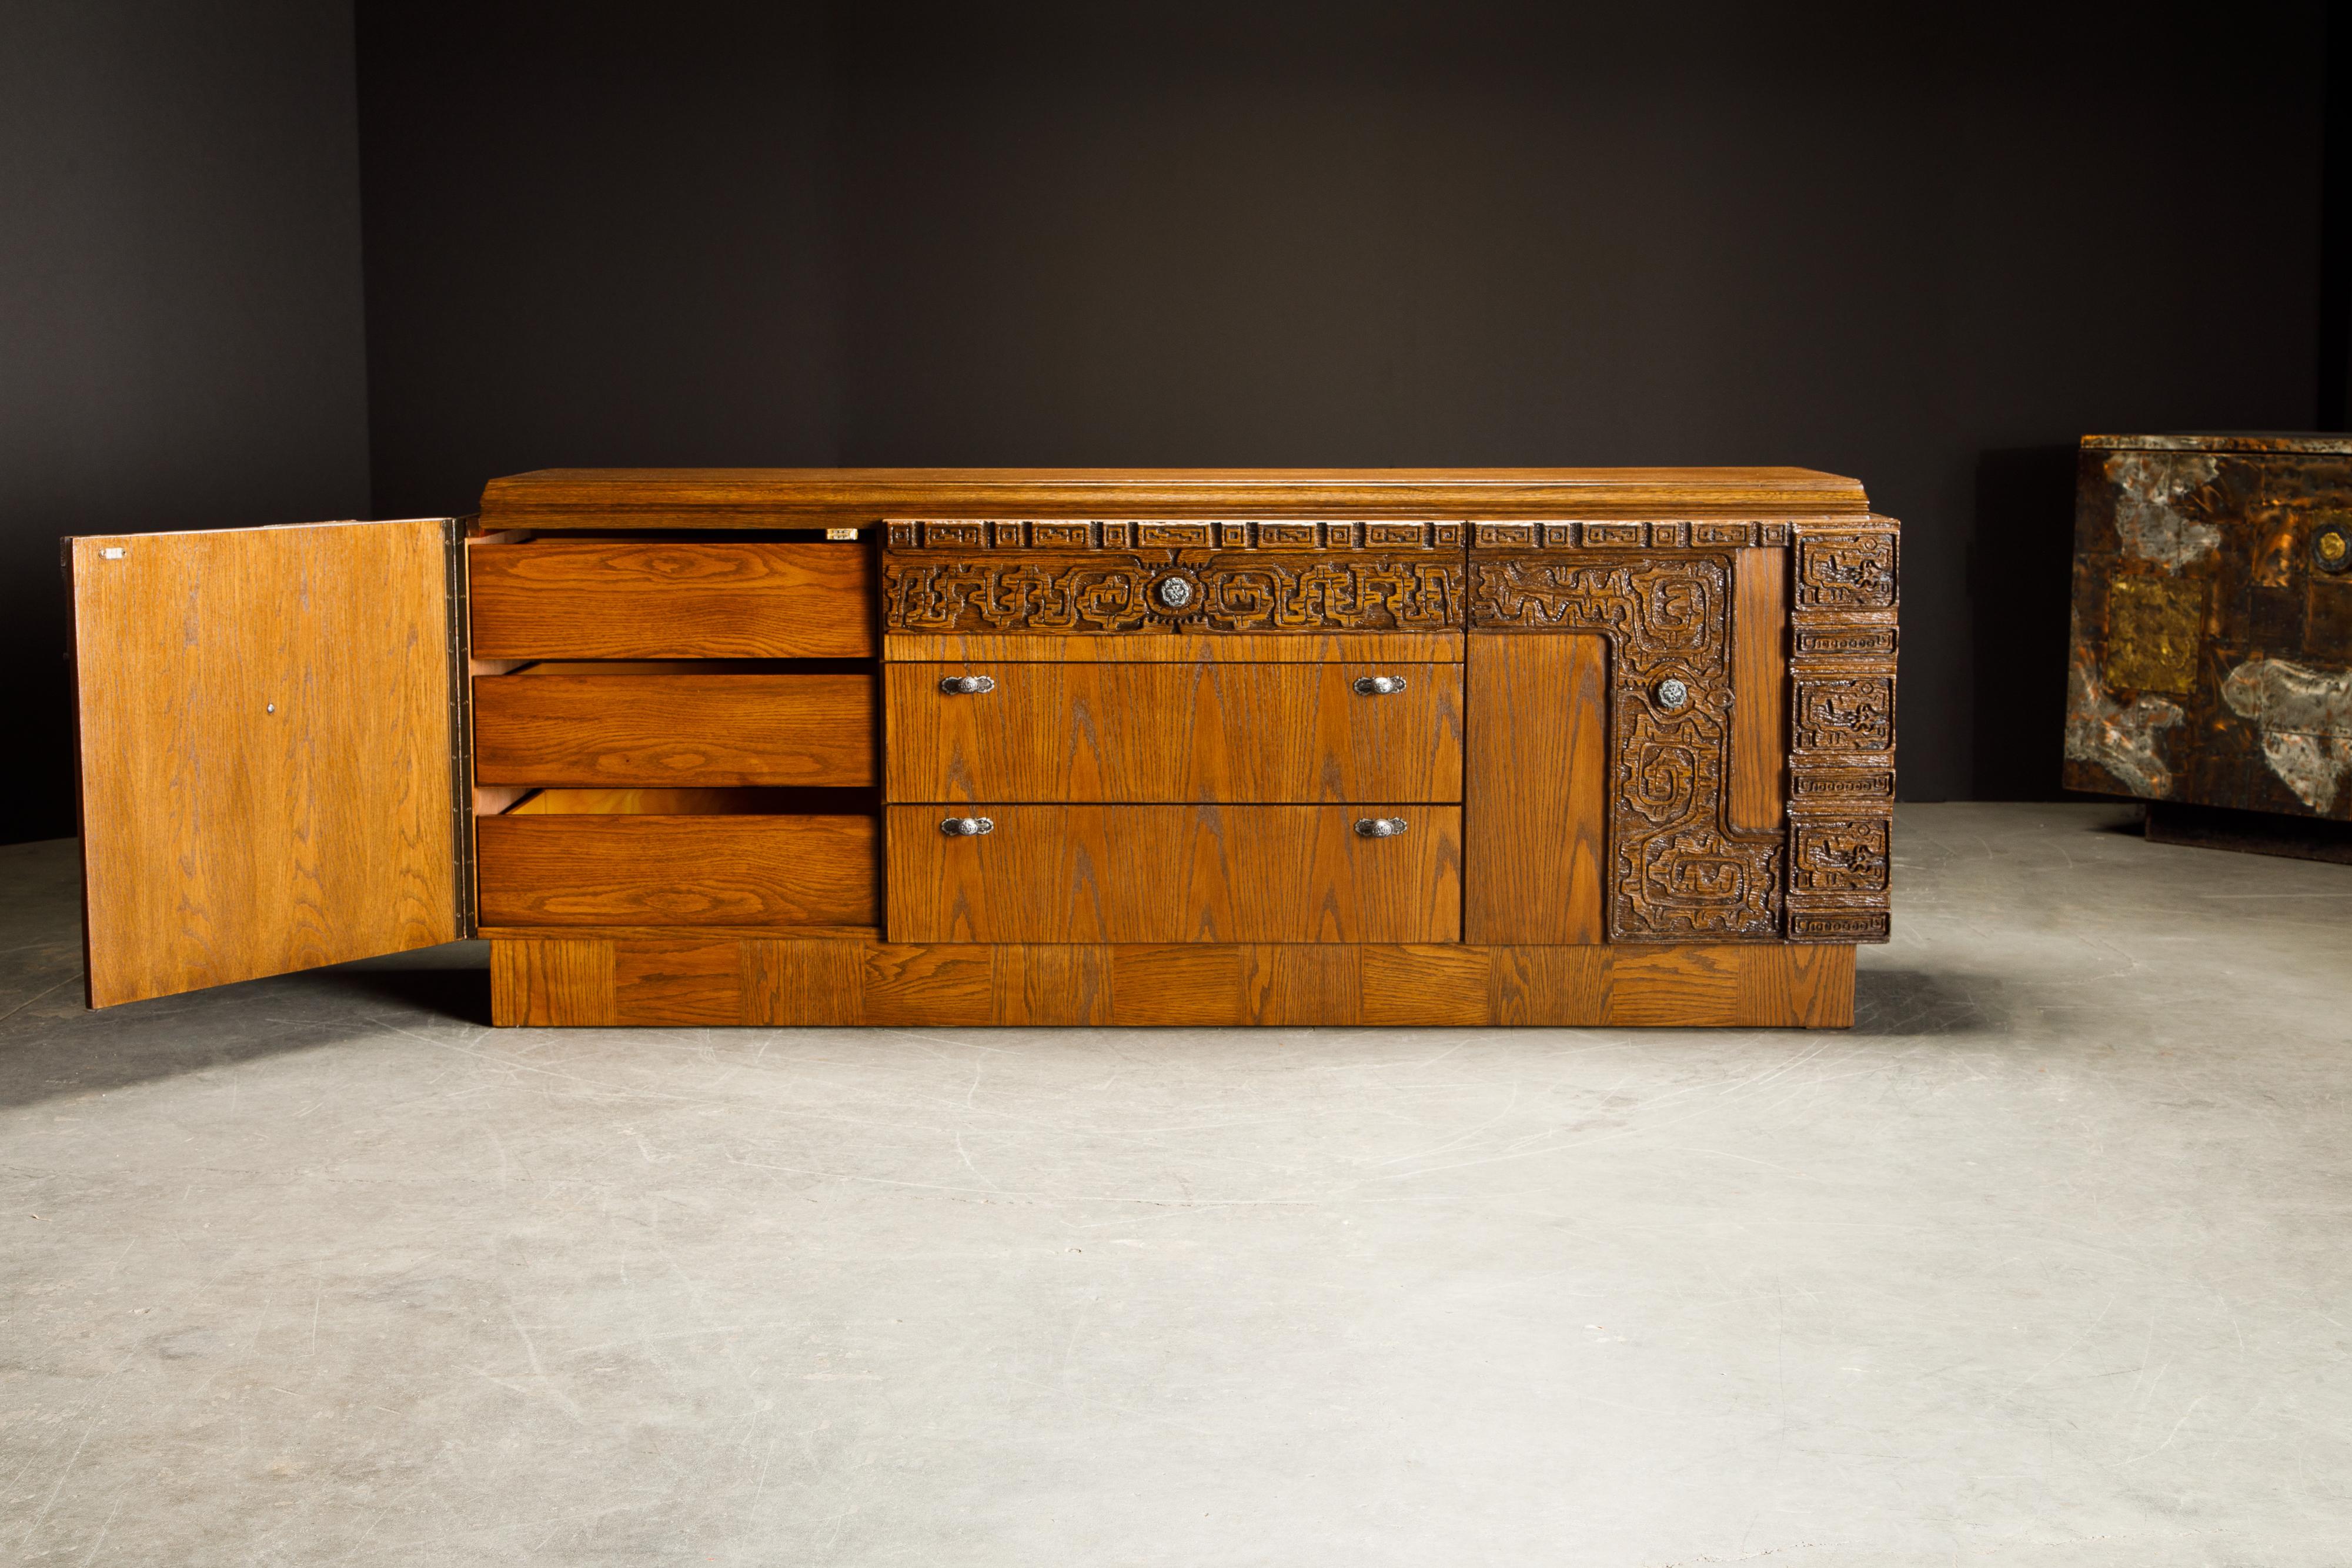 We beautifully restored this incredibly unique brutalist Mid-Century Modern dresser / credenza which features heavy pewter handles and door pulls, carved cerused oak in a Mayan / Aztec style, beautiful oak wood grain throughout, and plenty of